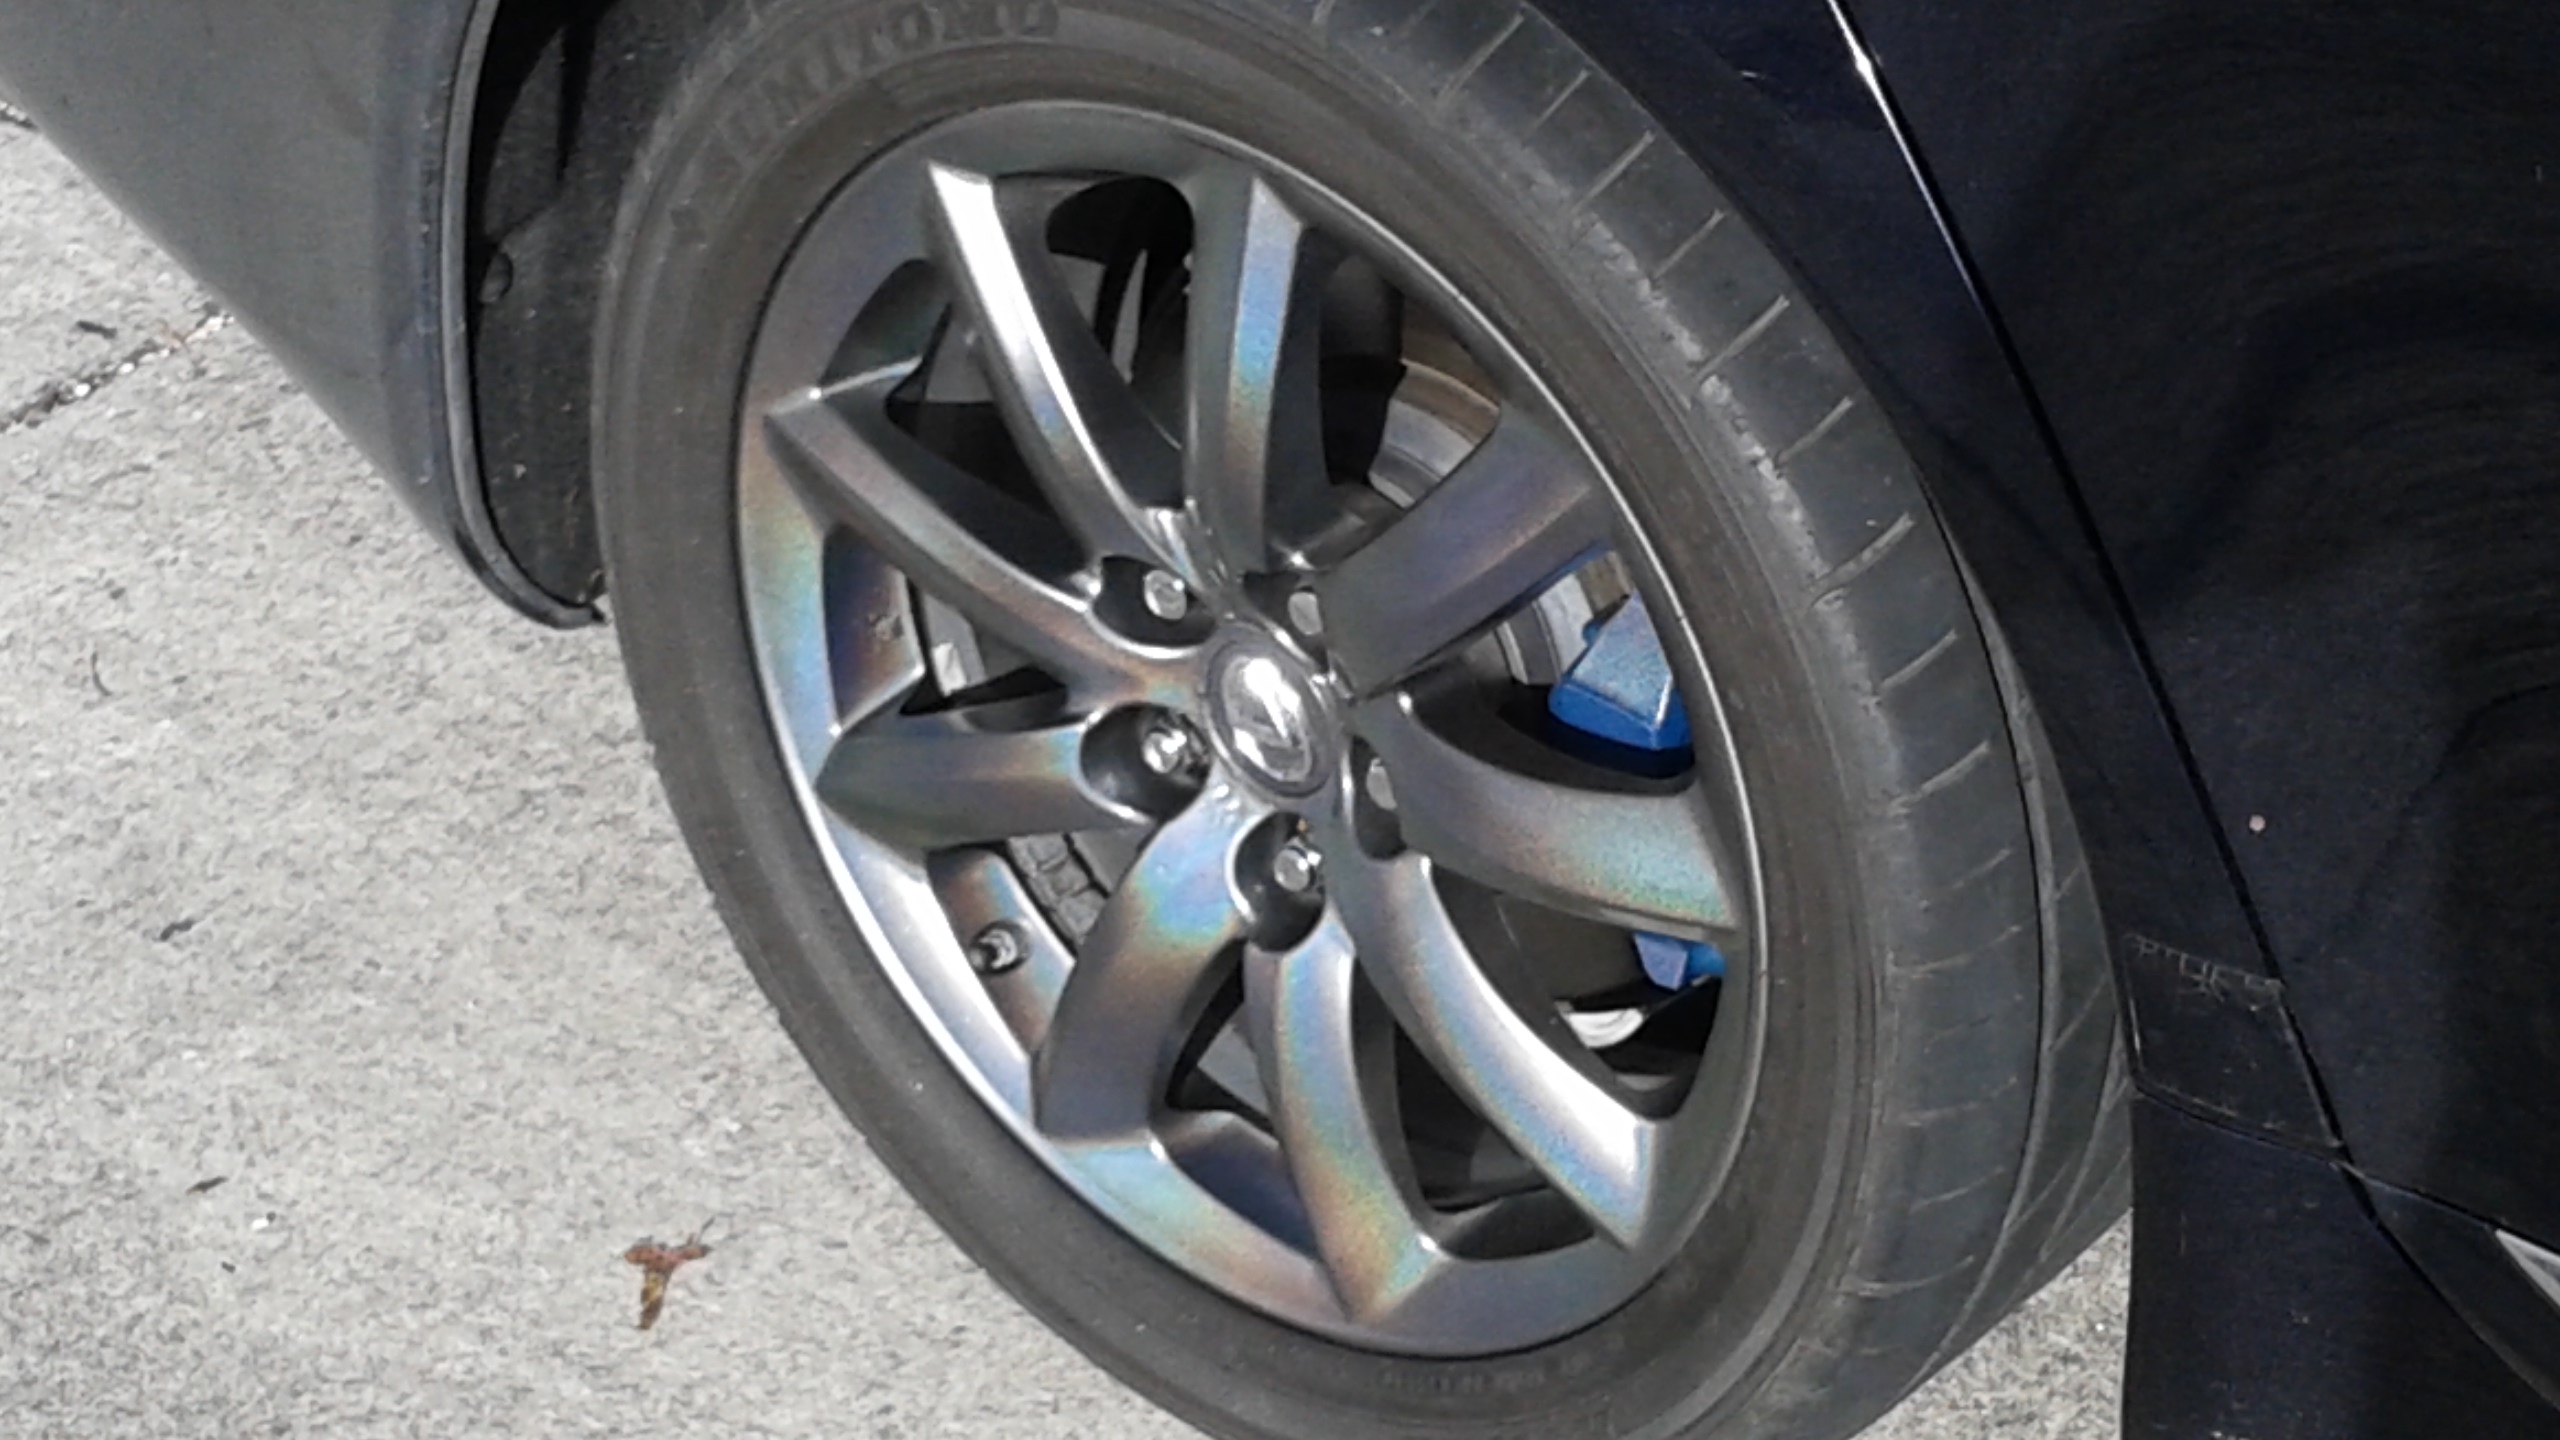 Painted OEM rims with ISF Rim Toyota paint code (1E3) and Clear Effex clear  coat - ClubLexus - Lexus Forum Discussion